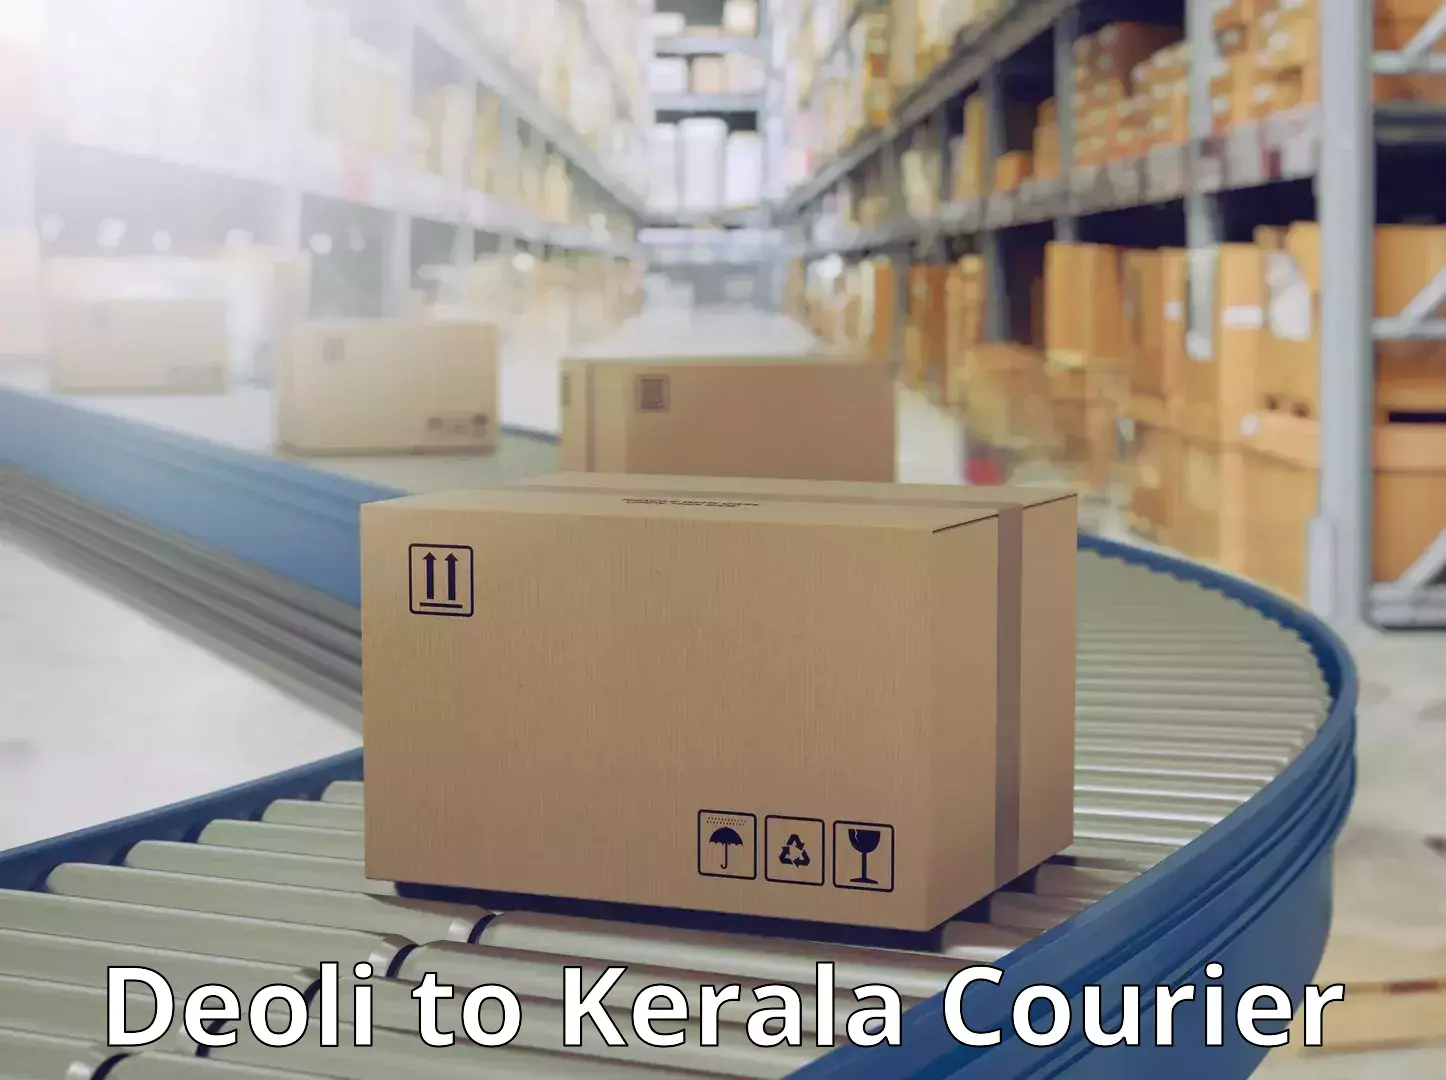 Automated parcel services Deoli to Kerala